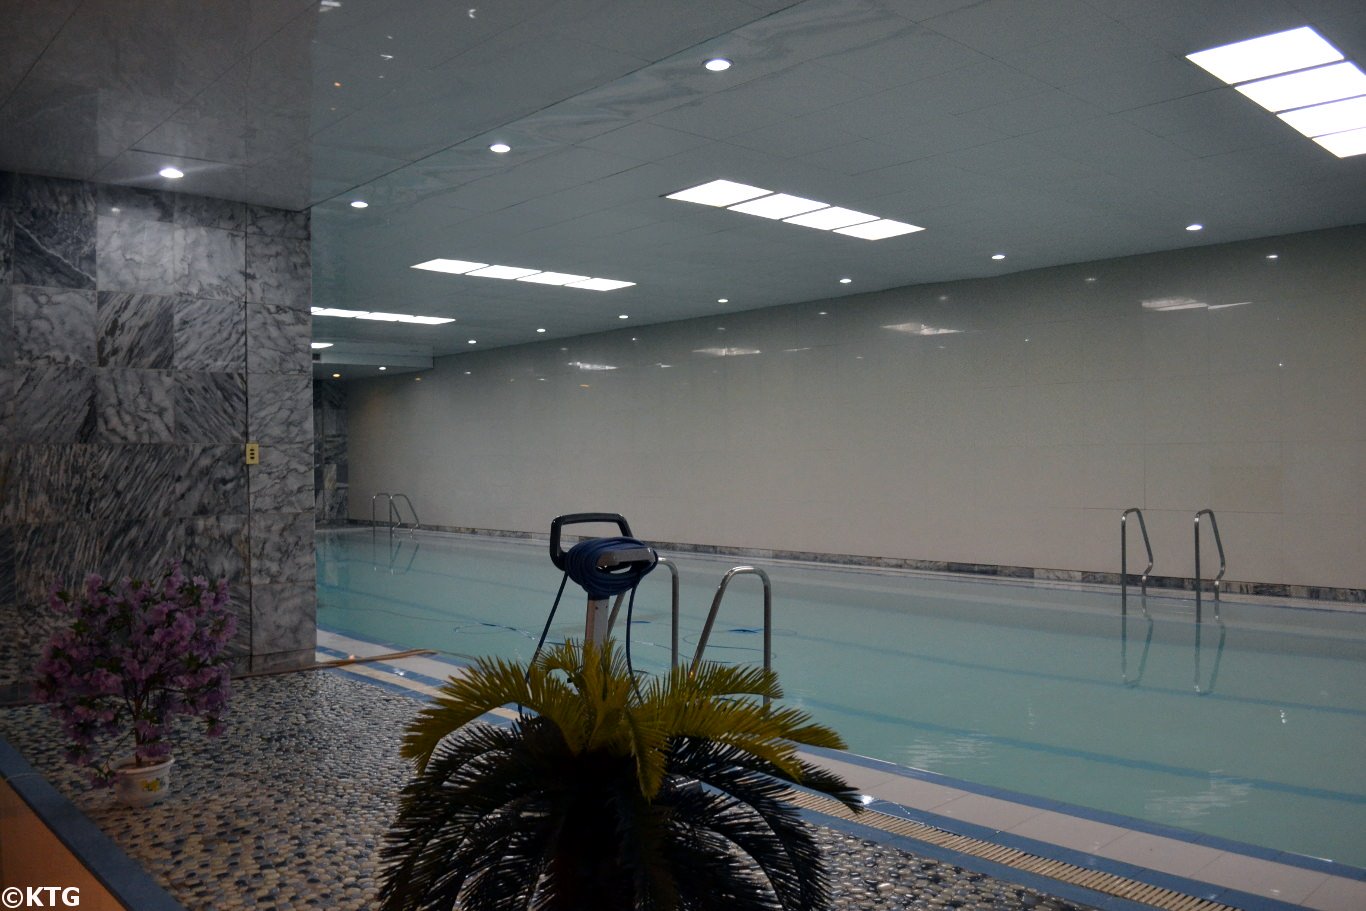 Swimming pool in the Yanggakdo Hotel in North Korea (DPRK). Trip arranged by KTG Tours